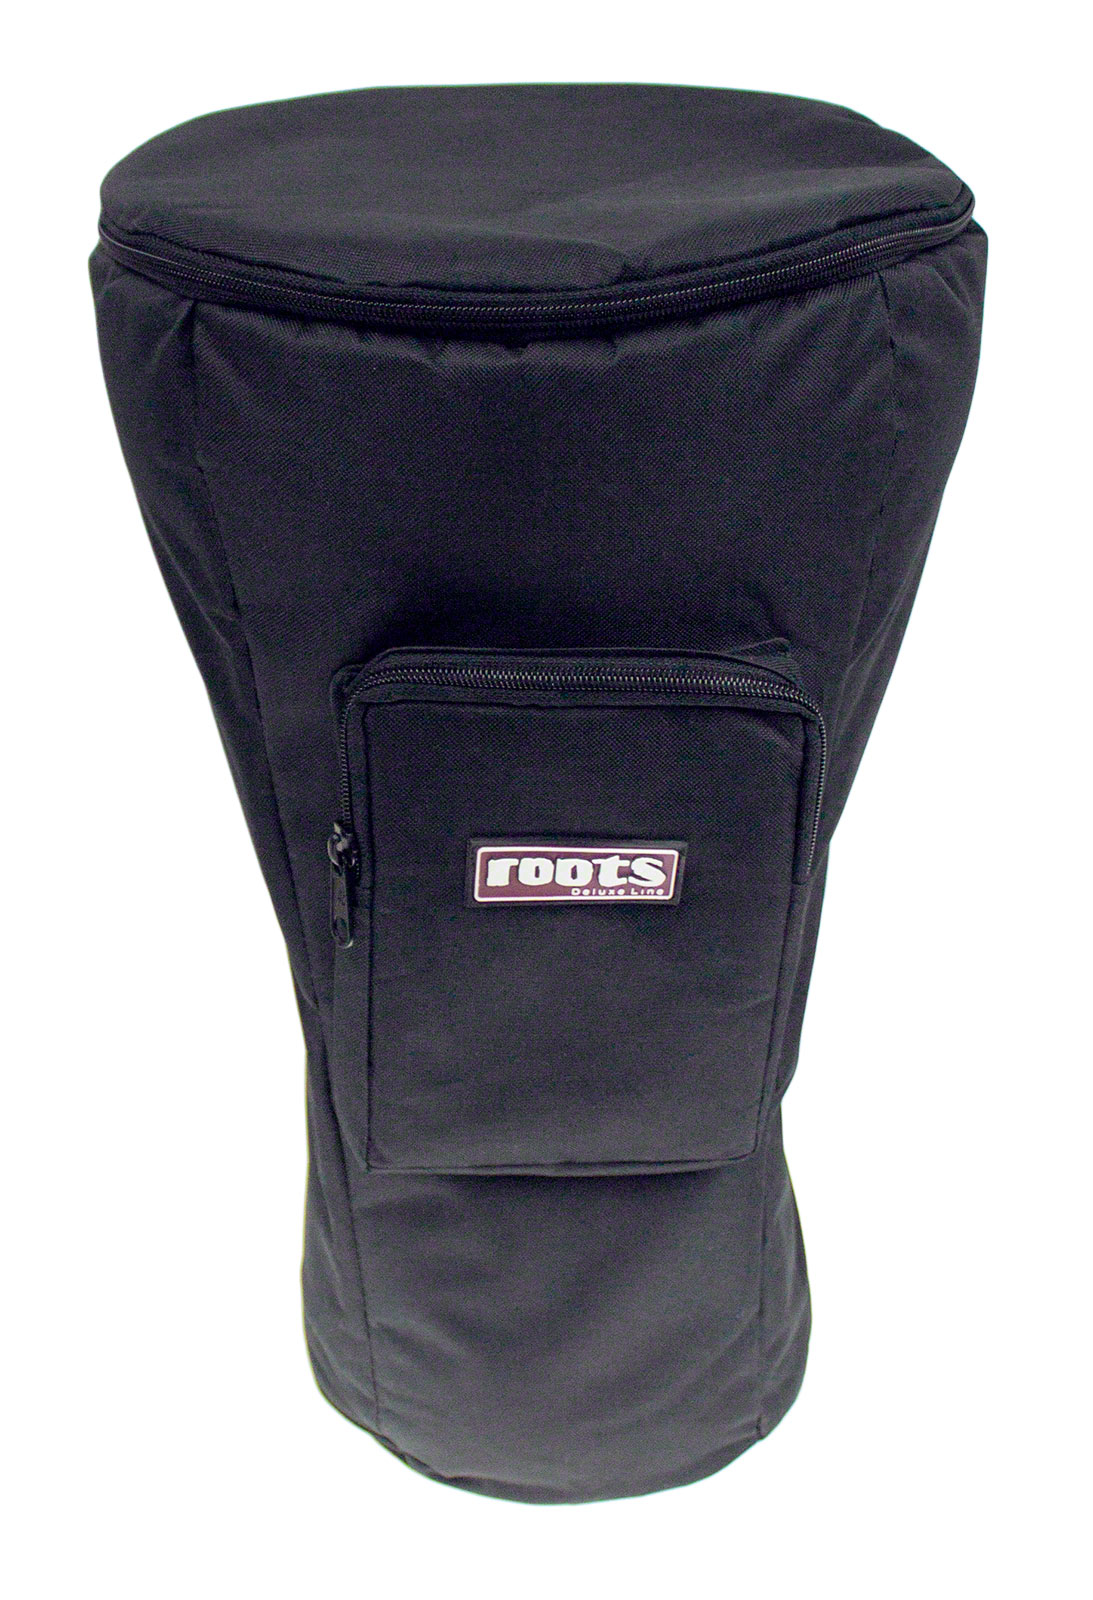 ROOTS PERCUSSION DOUMBEK DELUXE PROTECTION BAG - SMALL DJEMBE)